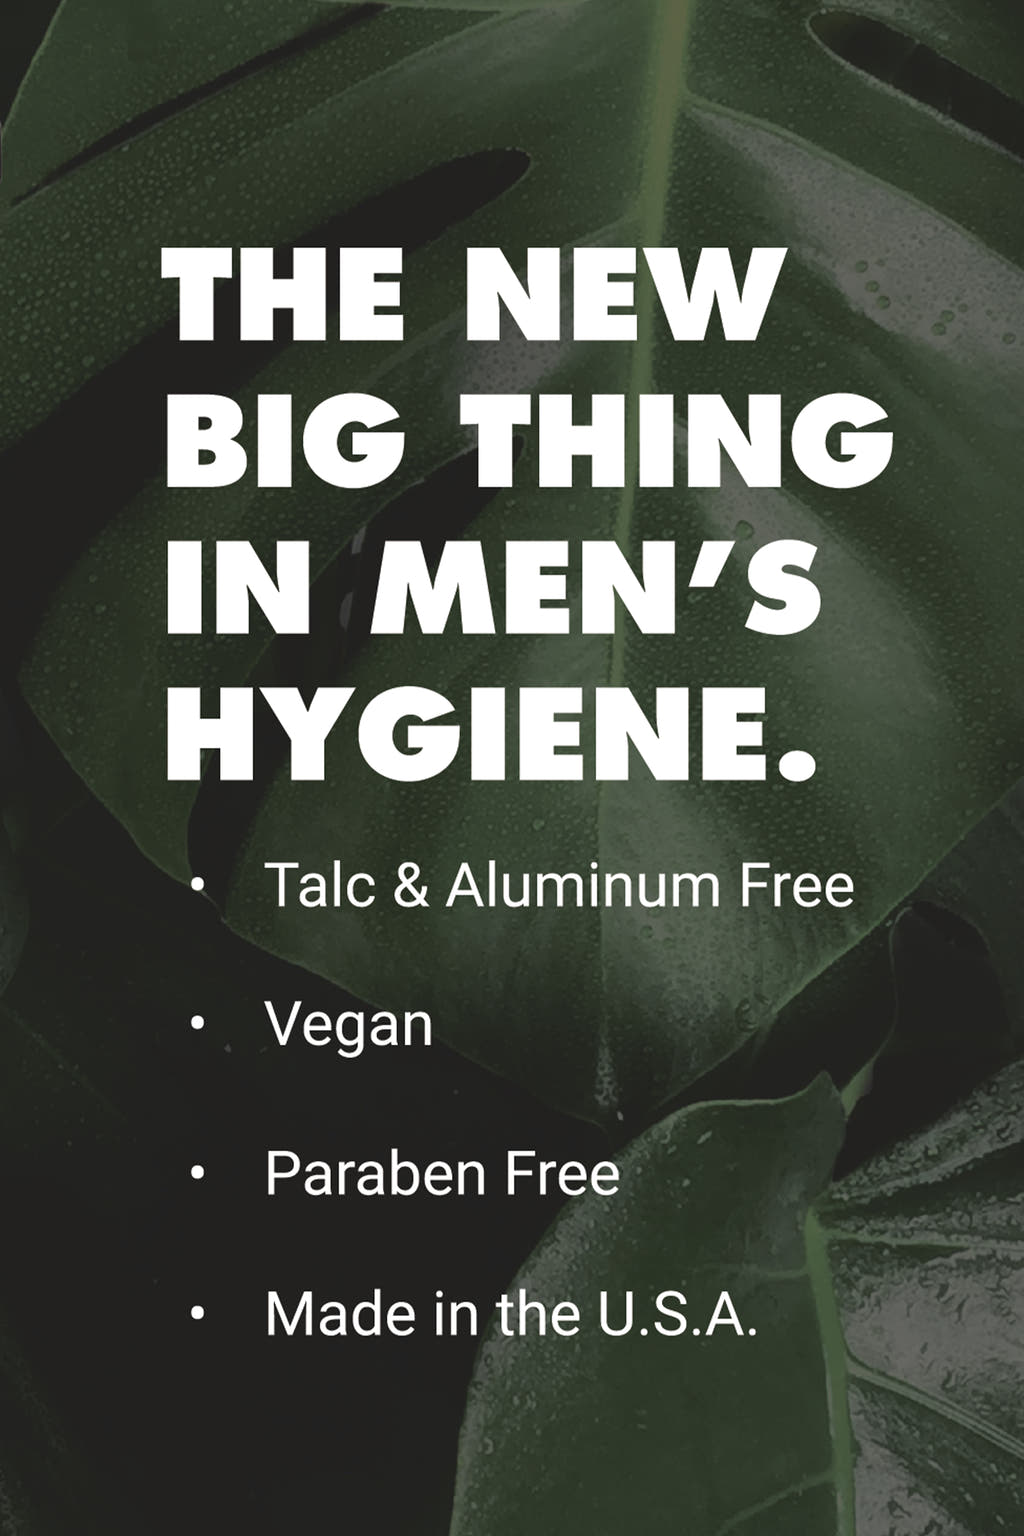 the new big things in men's hygiene